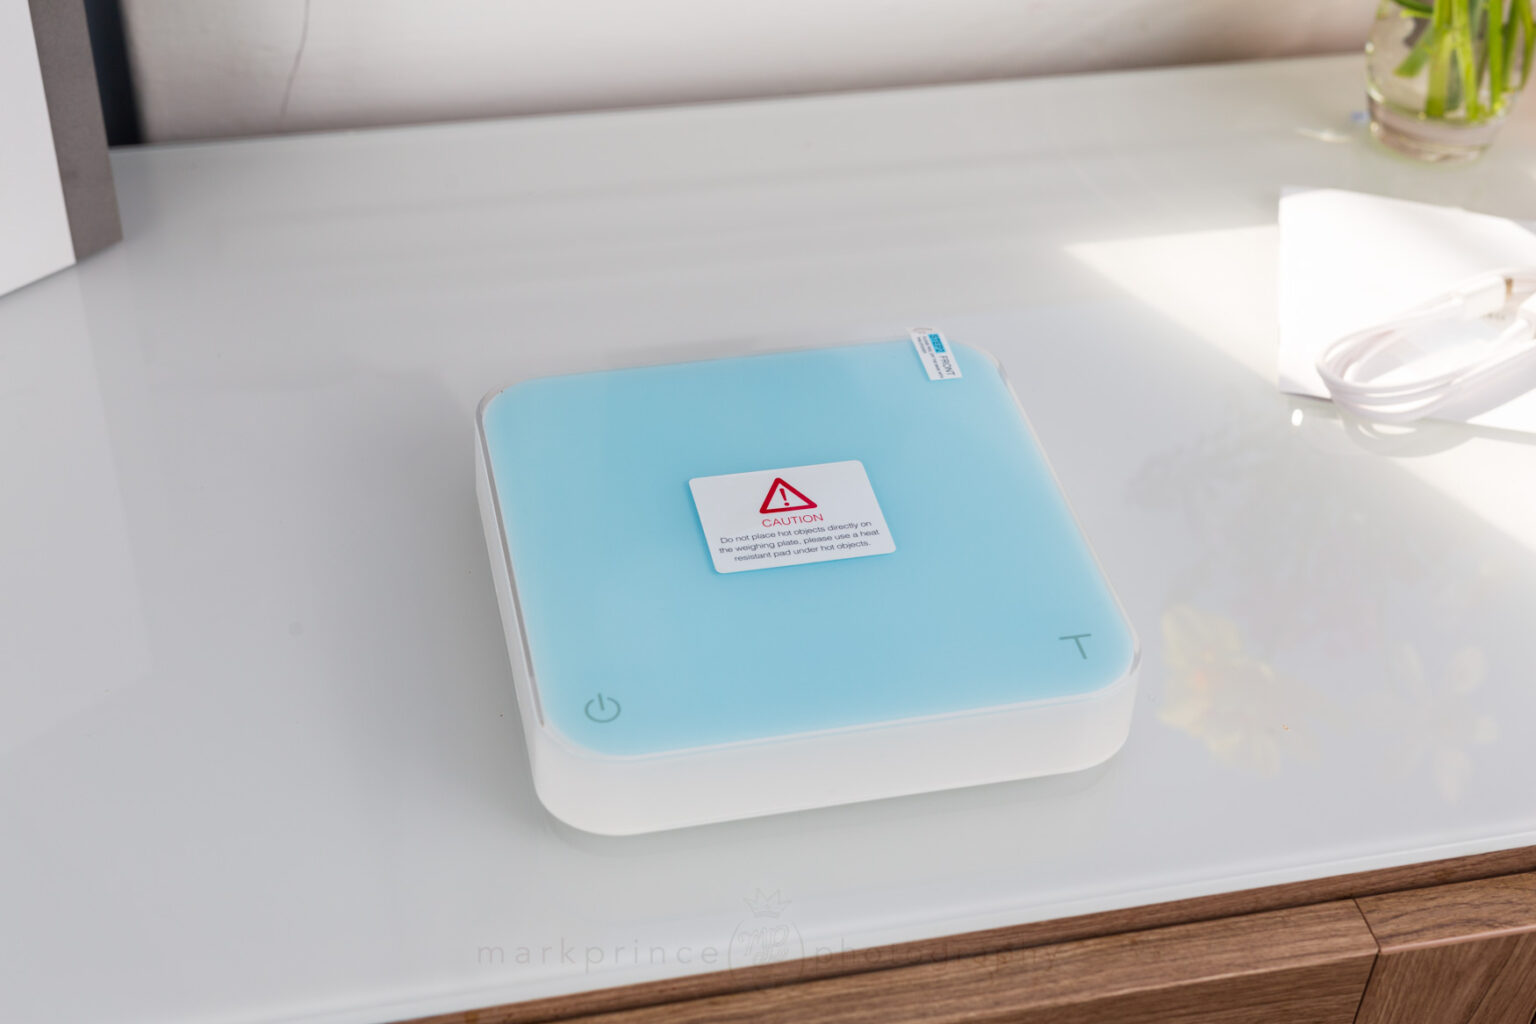 Protective Plastic on top of the scale